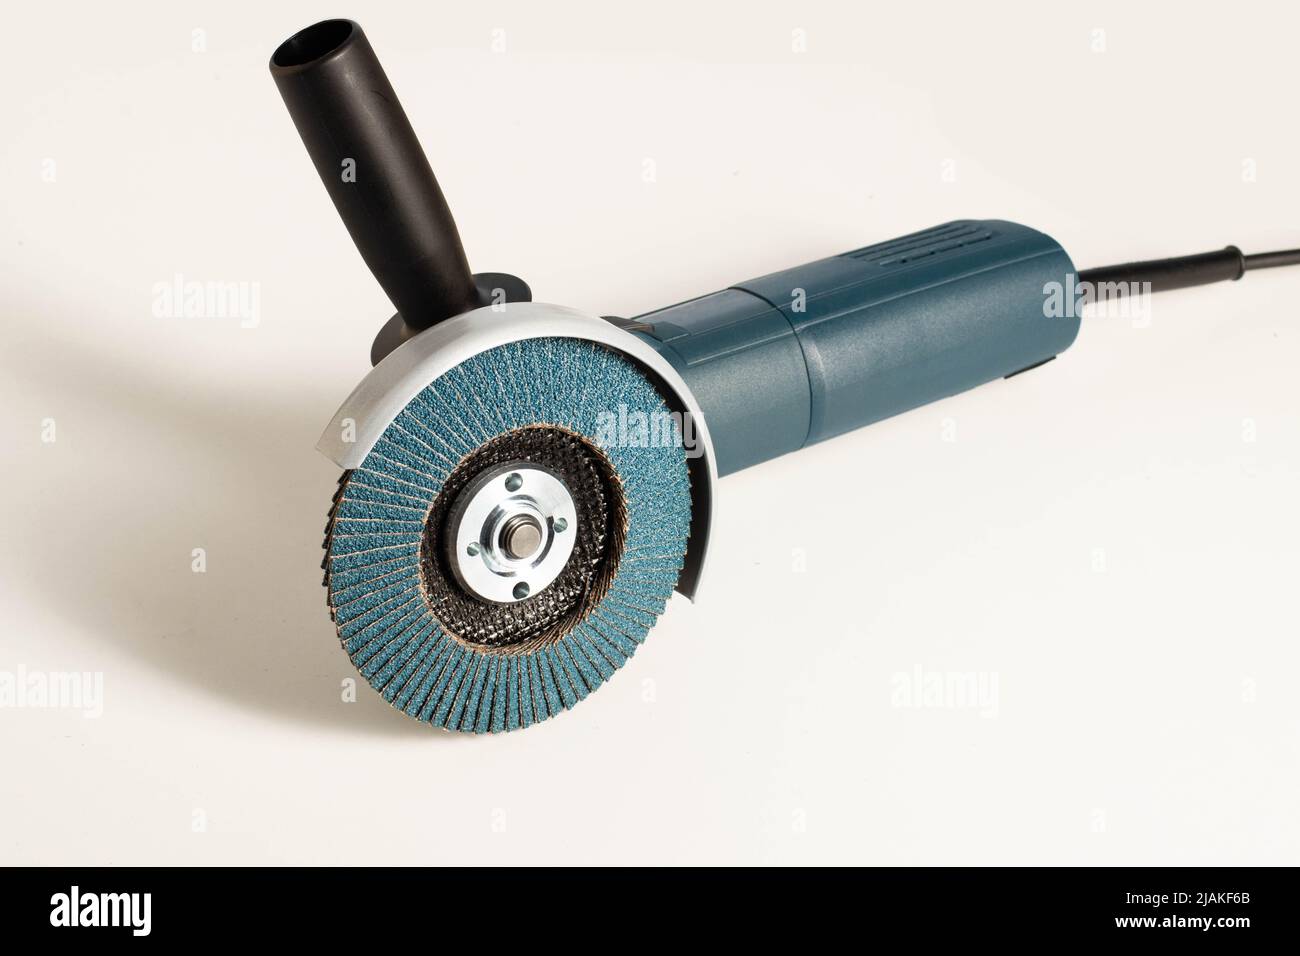 Modern professional angle grinder with a flap wheel on a white background. Power tool for work. Sanding wood and metal. Close-up. Vibration damping fu Stock Photo